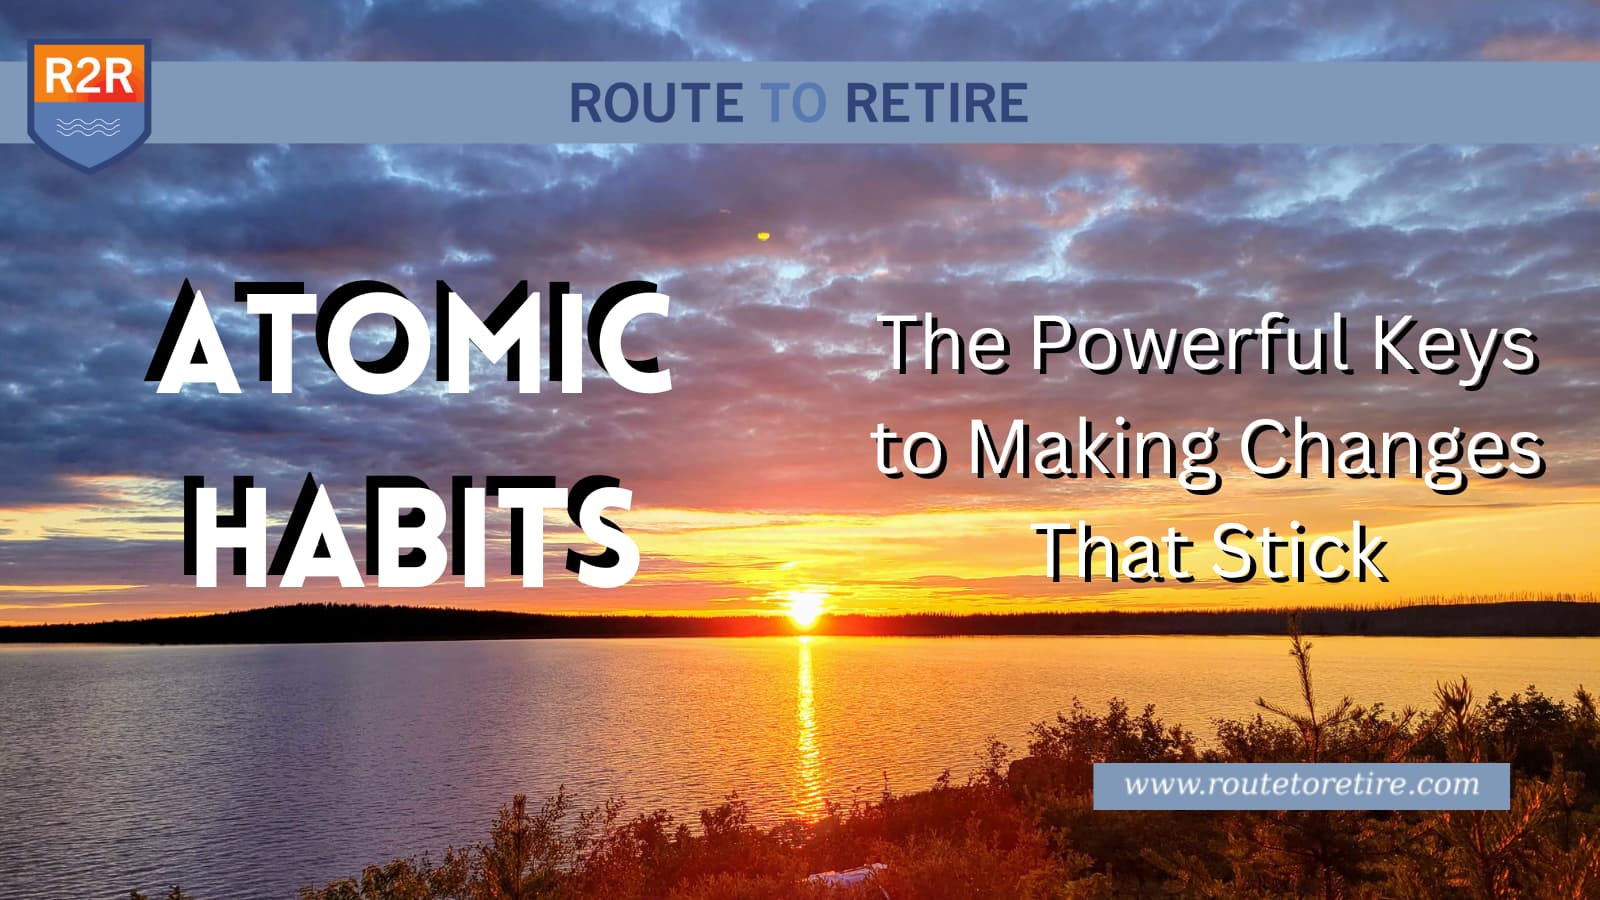 Atomic Habits – The Powerful Keys to Making Changes That Stick